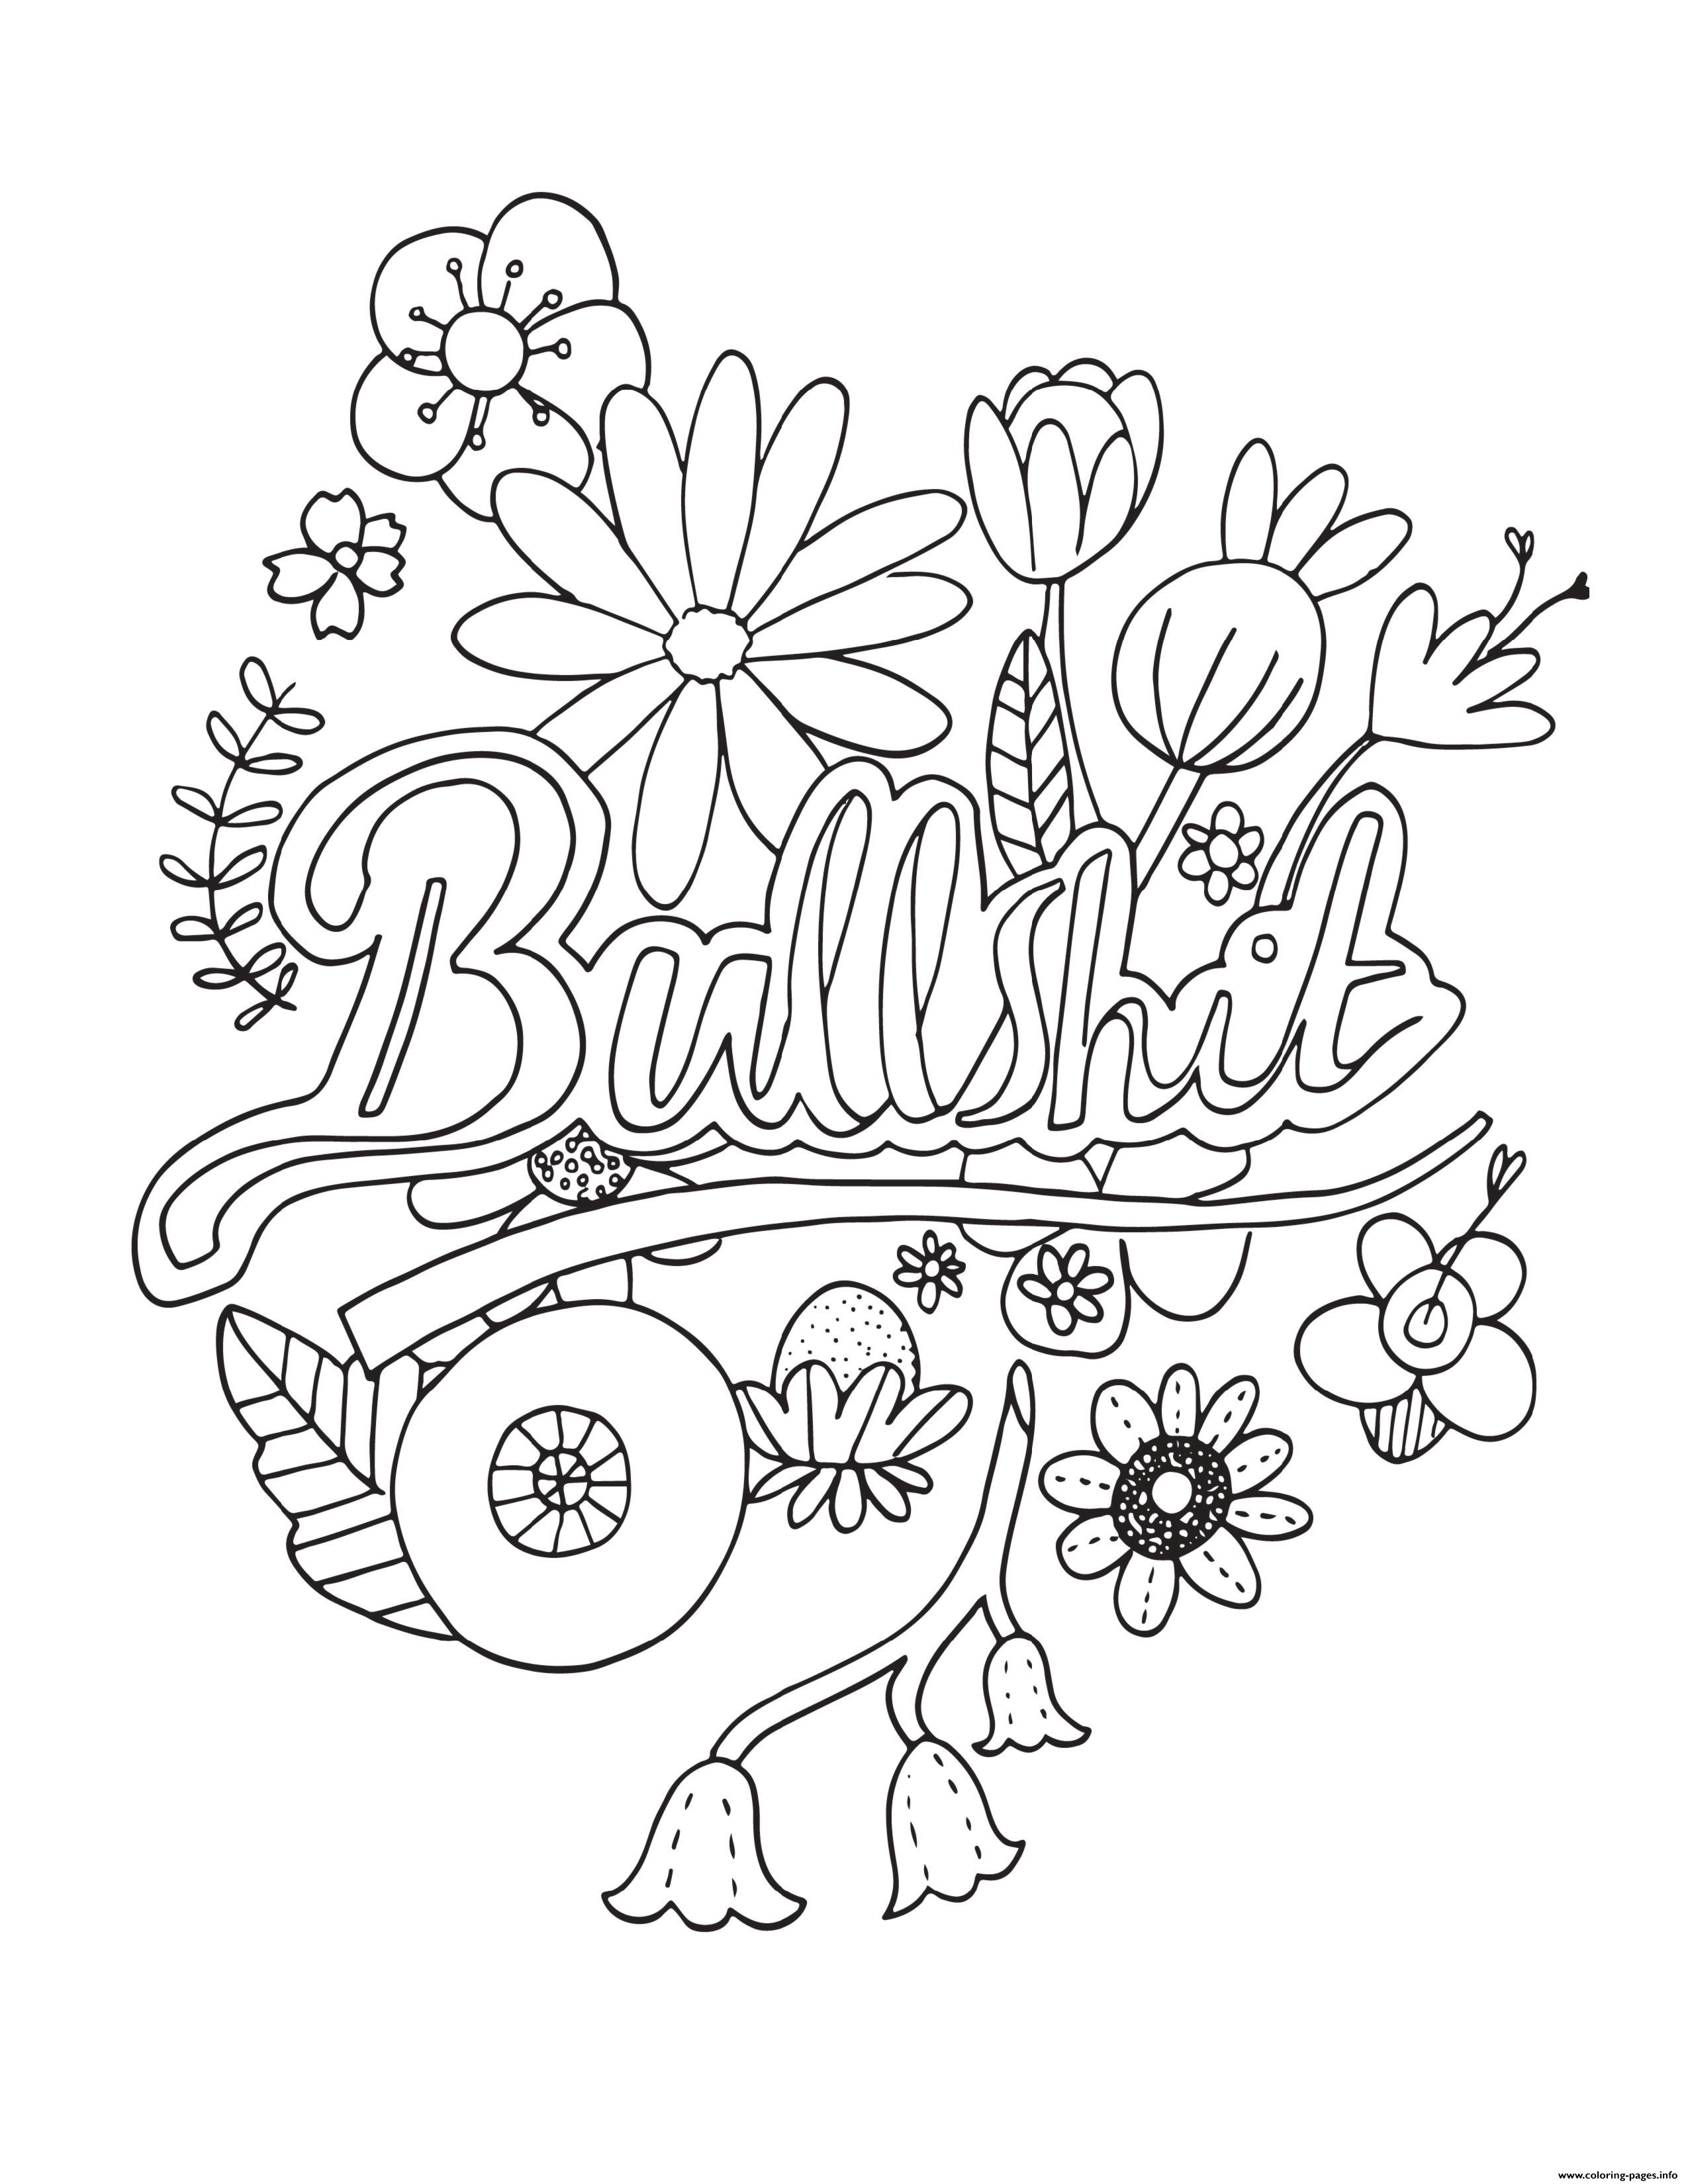 Bullshit Swear Word Coloring Pages Printable